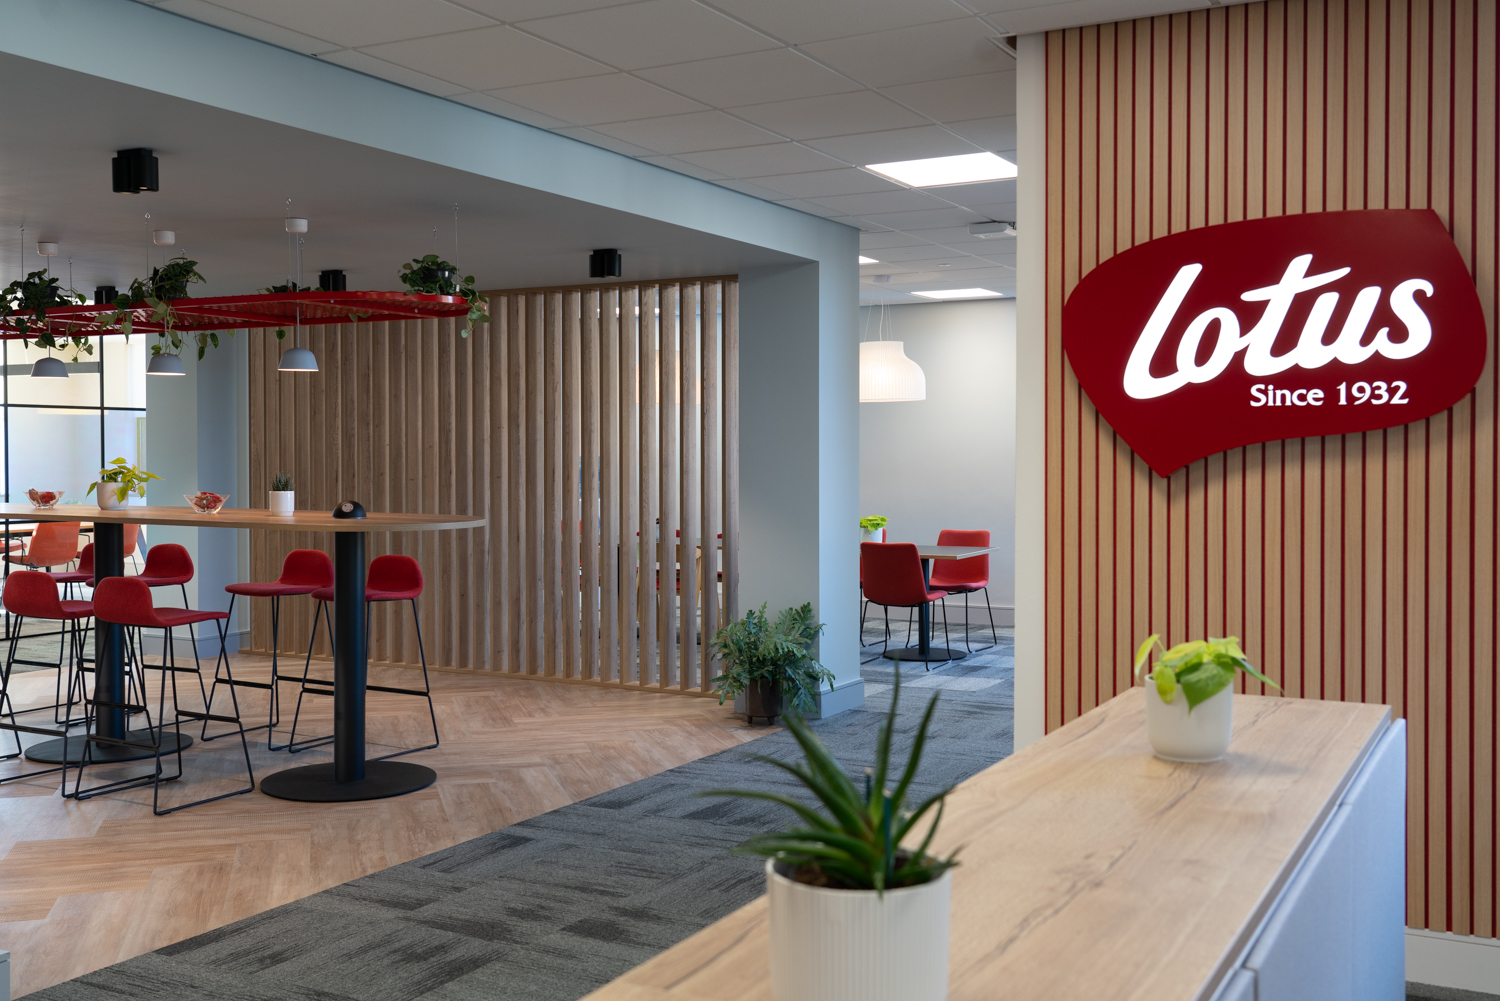 Lotus Bakeries UK – Completed Project